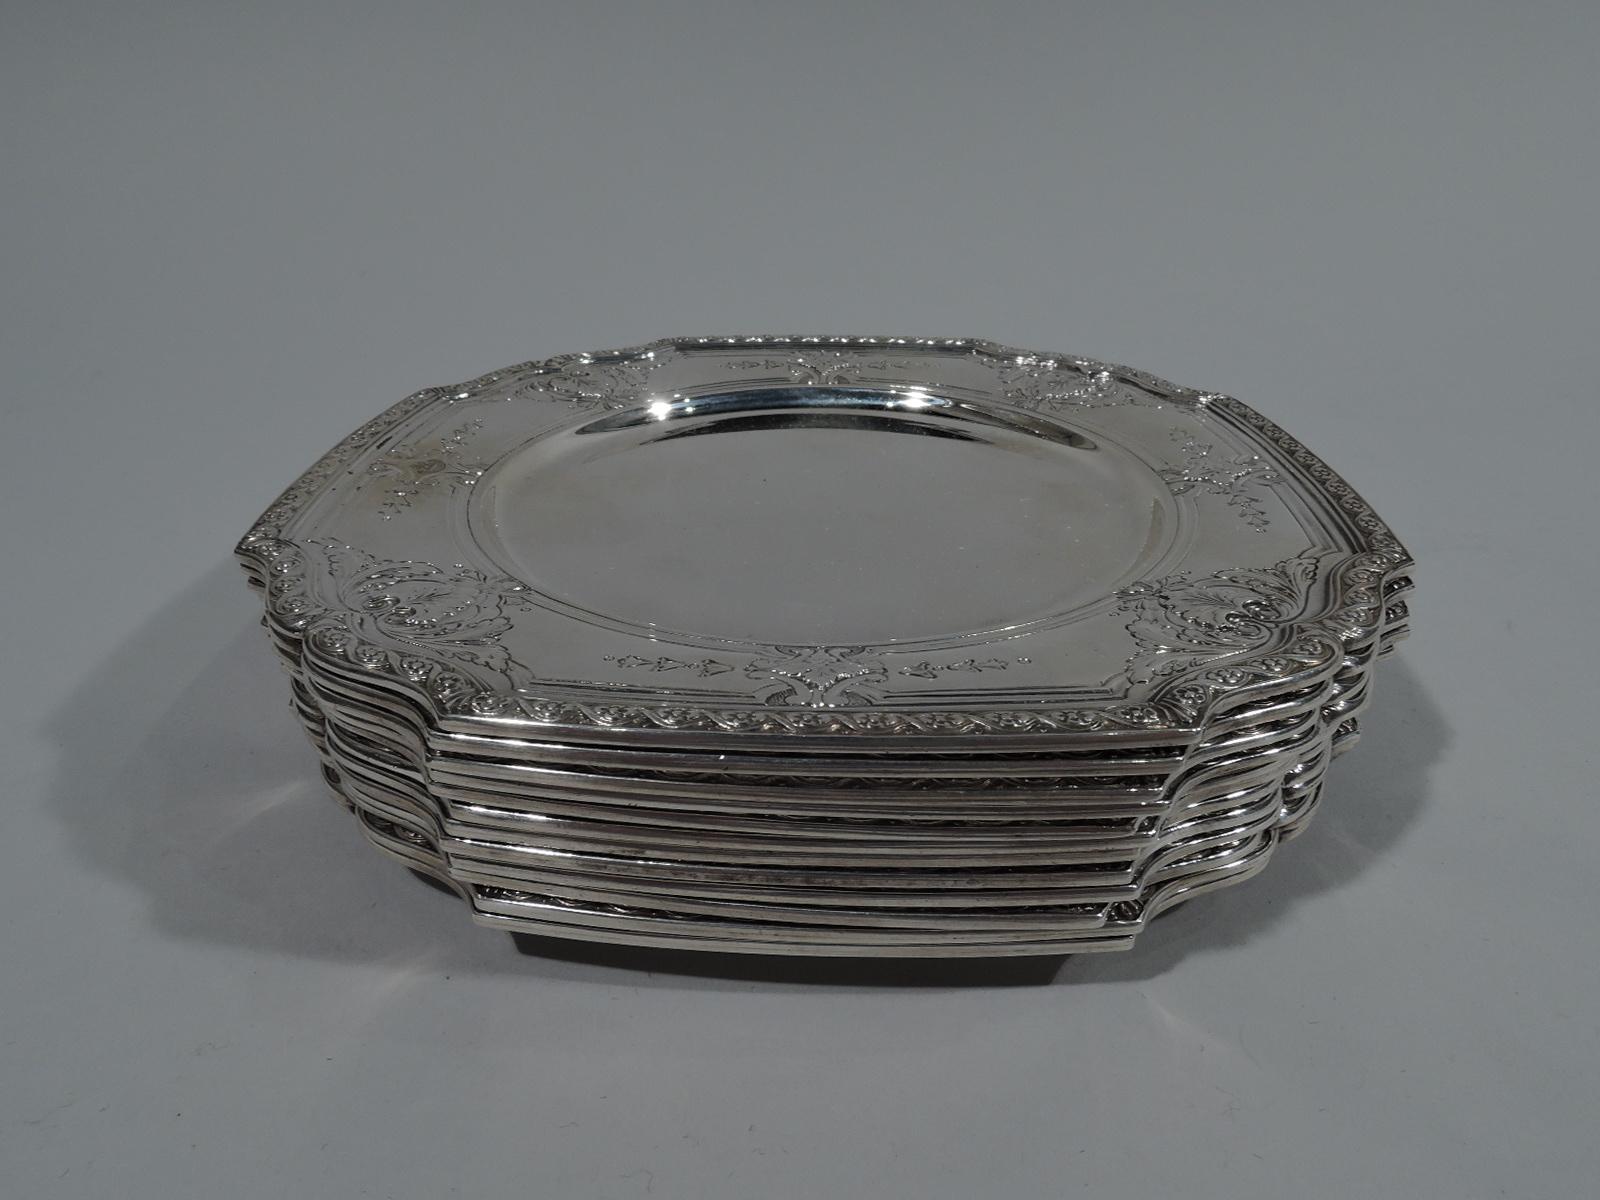 Twelve Edwardian bread and butter plates. Made by Tiffany & Co. in New York, circa 1916. Each plain circular well and four curved sides with double-scroll corners. Chased and engraved ornament: Fluid leaf set in scrolling-leaf frame alternating with